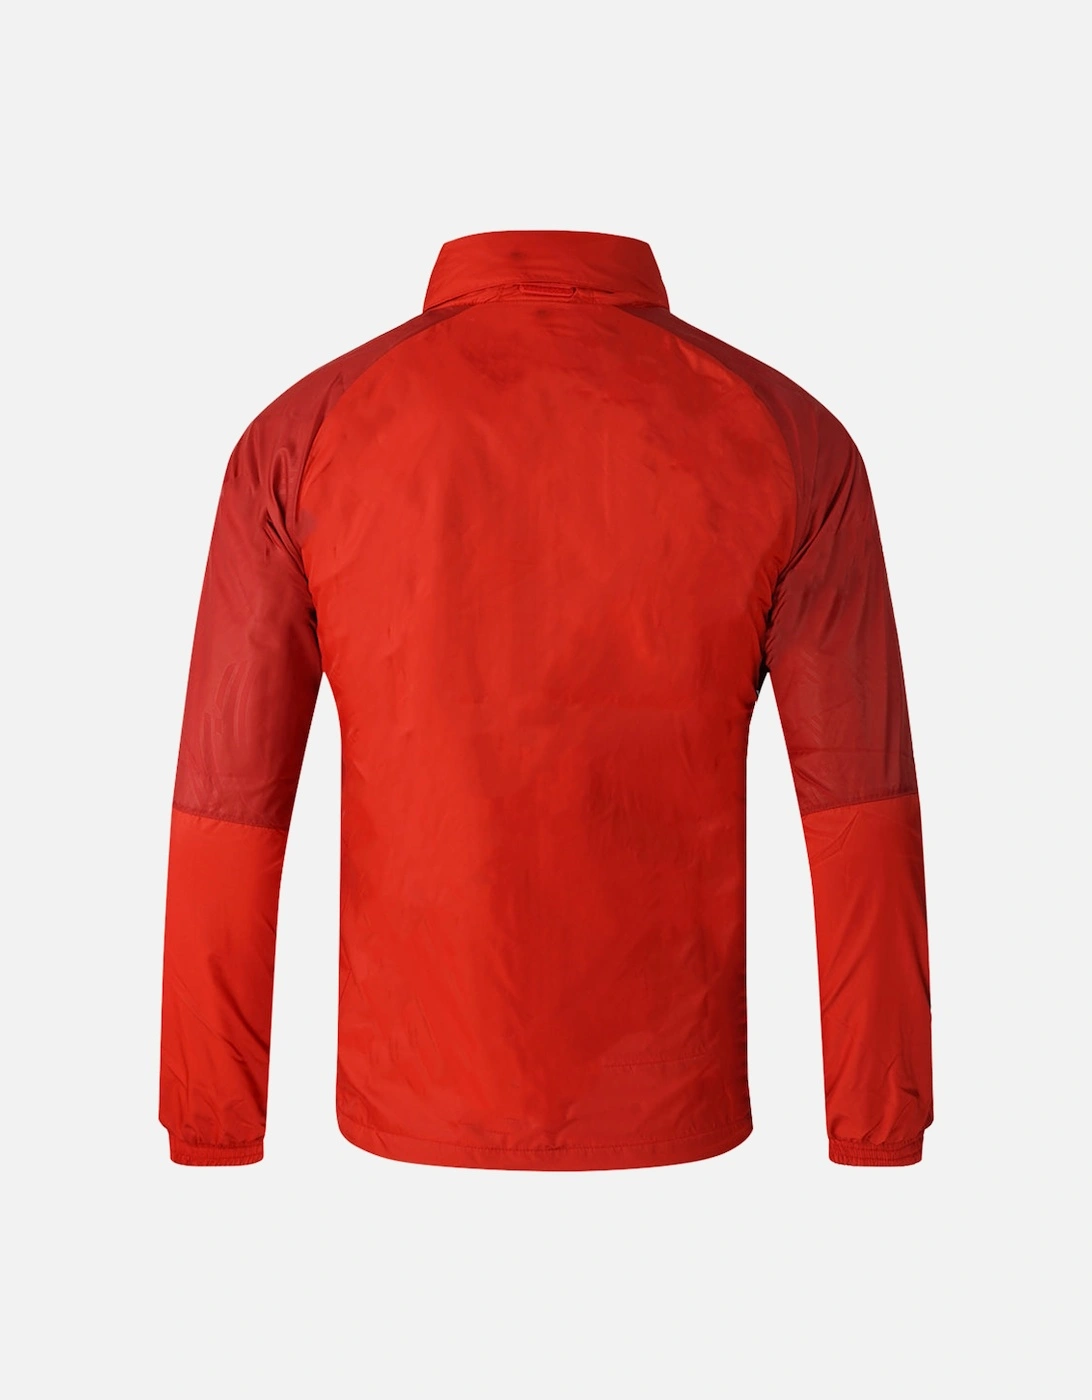 Windcell Lined Red Training Jacket